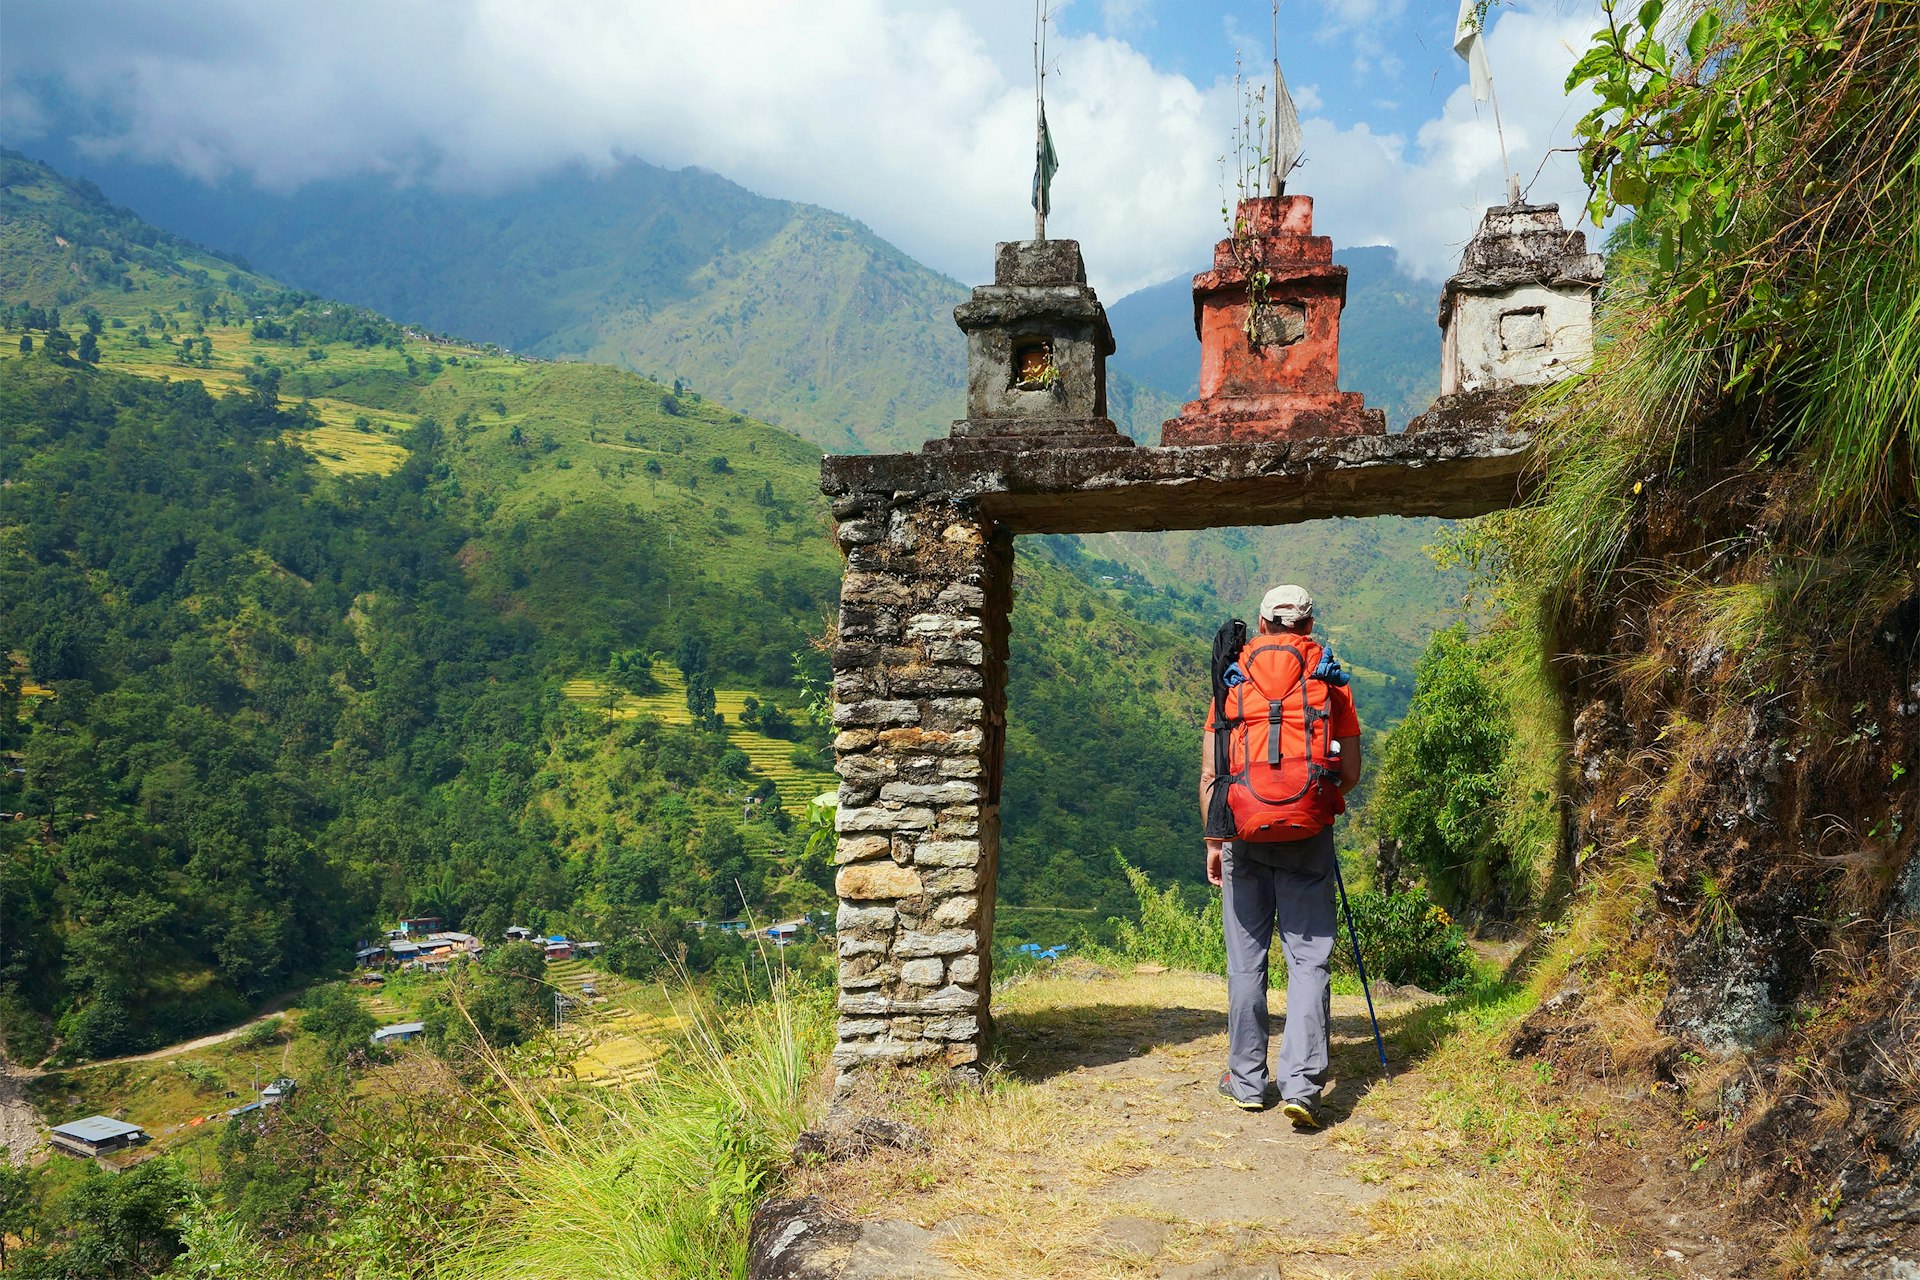 A hiker approaching an archway on a mountainous trail in Nepal